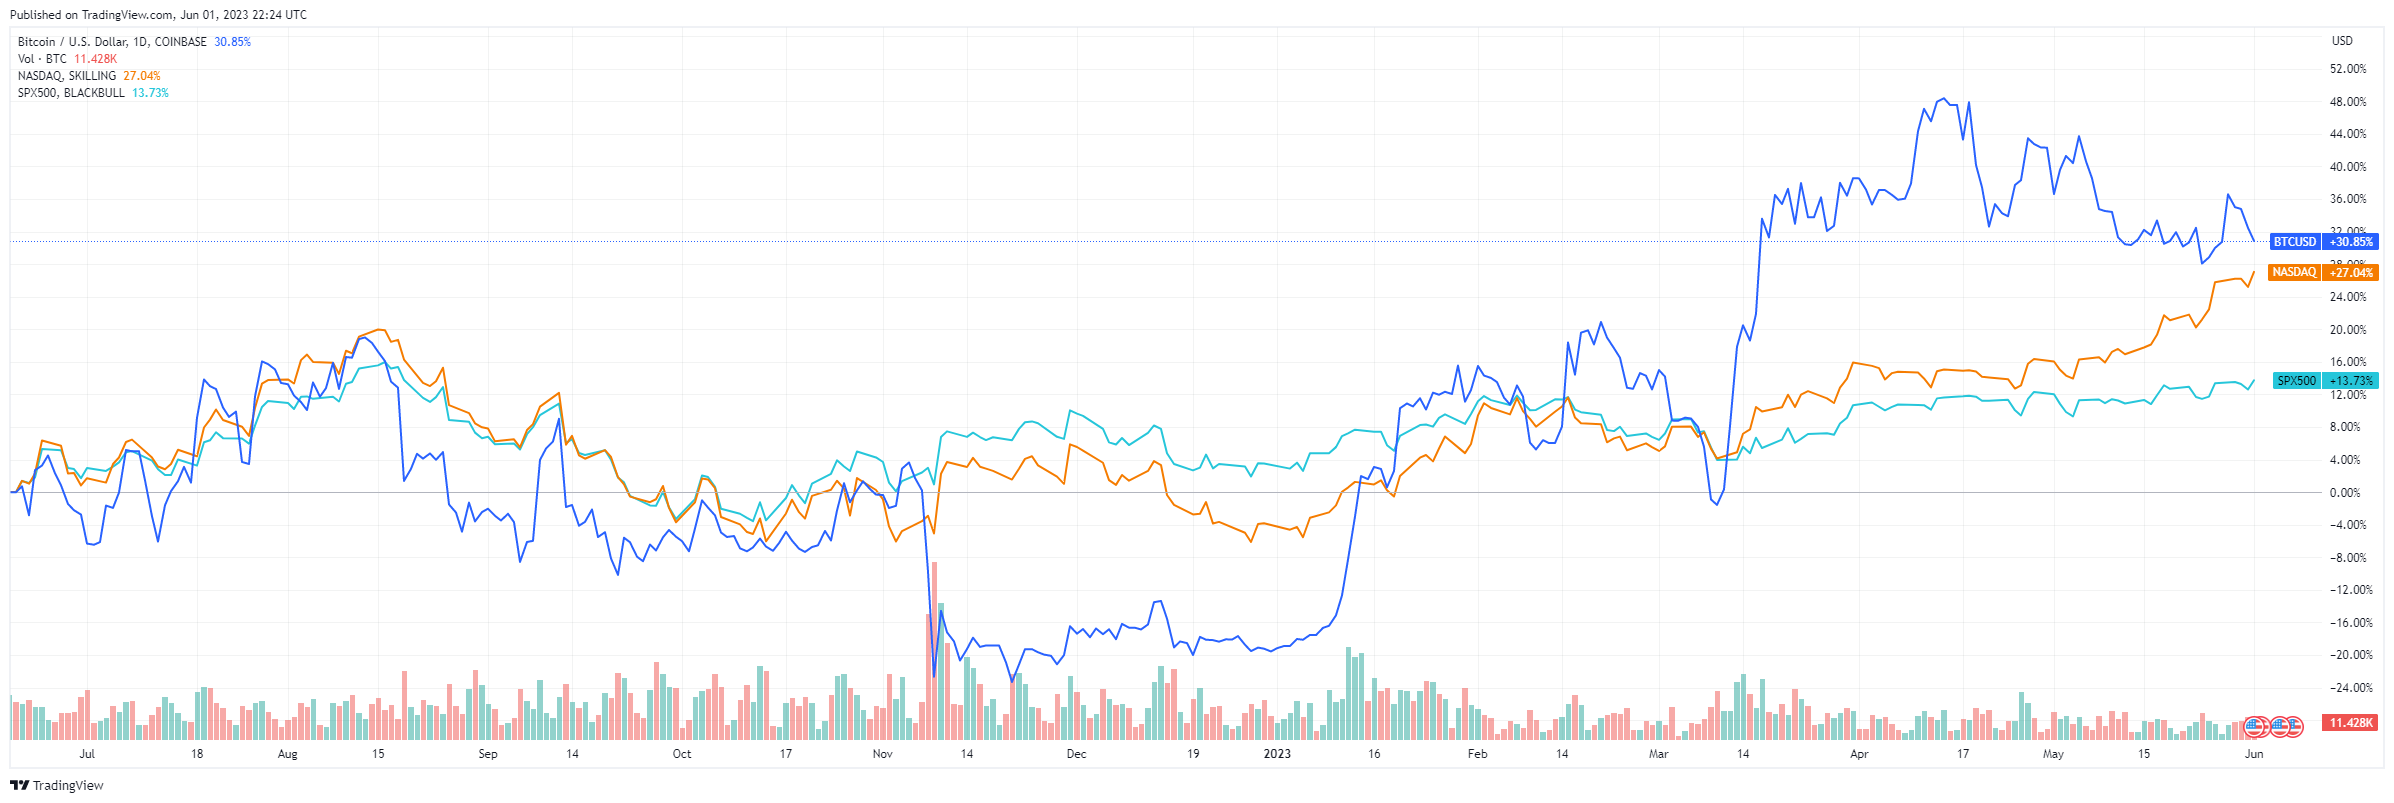 Line graph showing the price movement of bitcoin, the Nasdaq, and the S&P 500